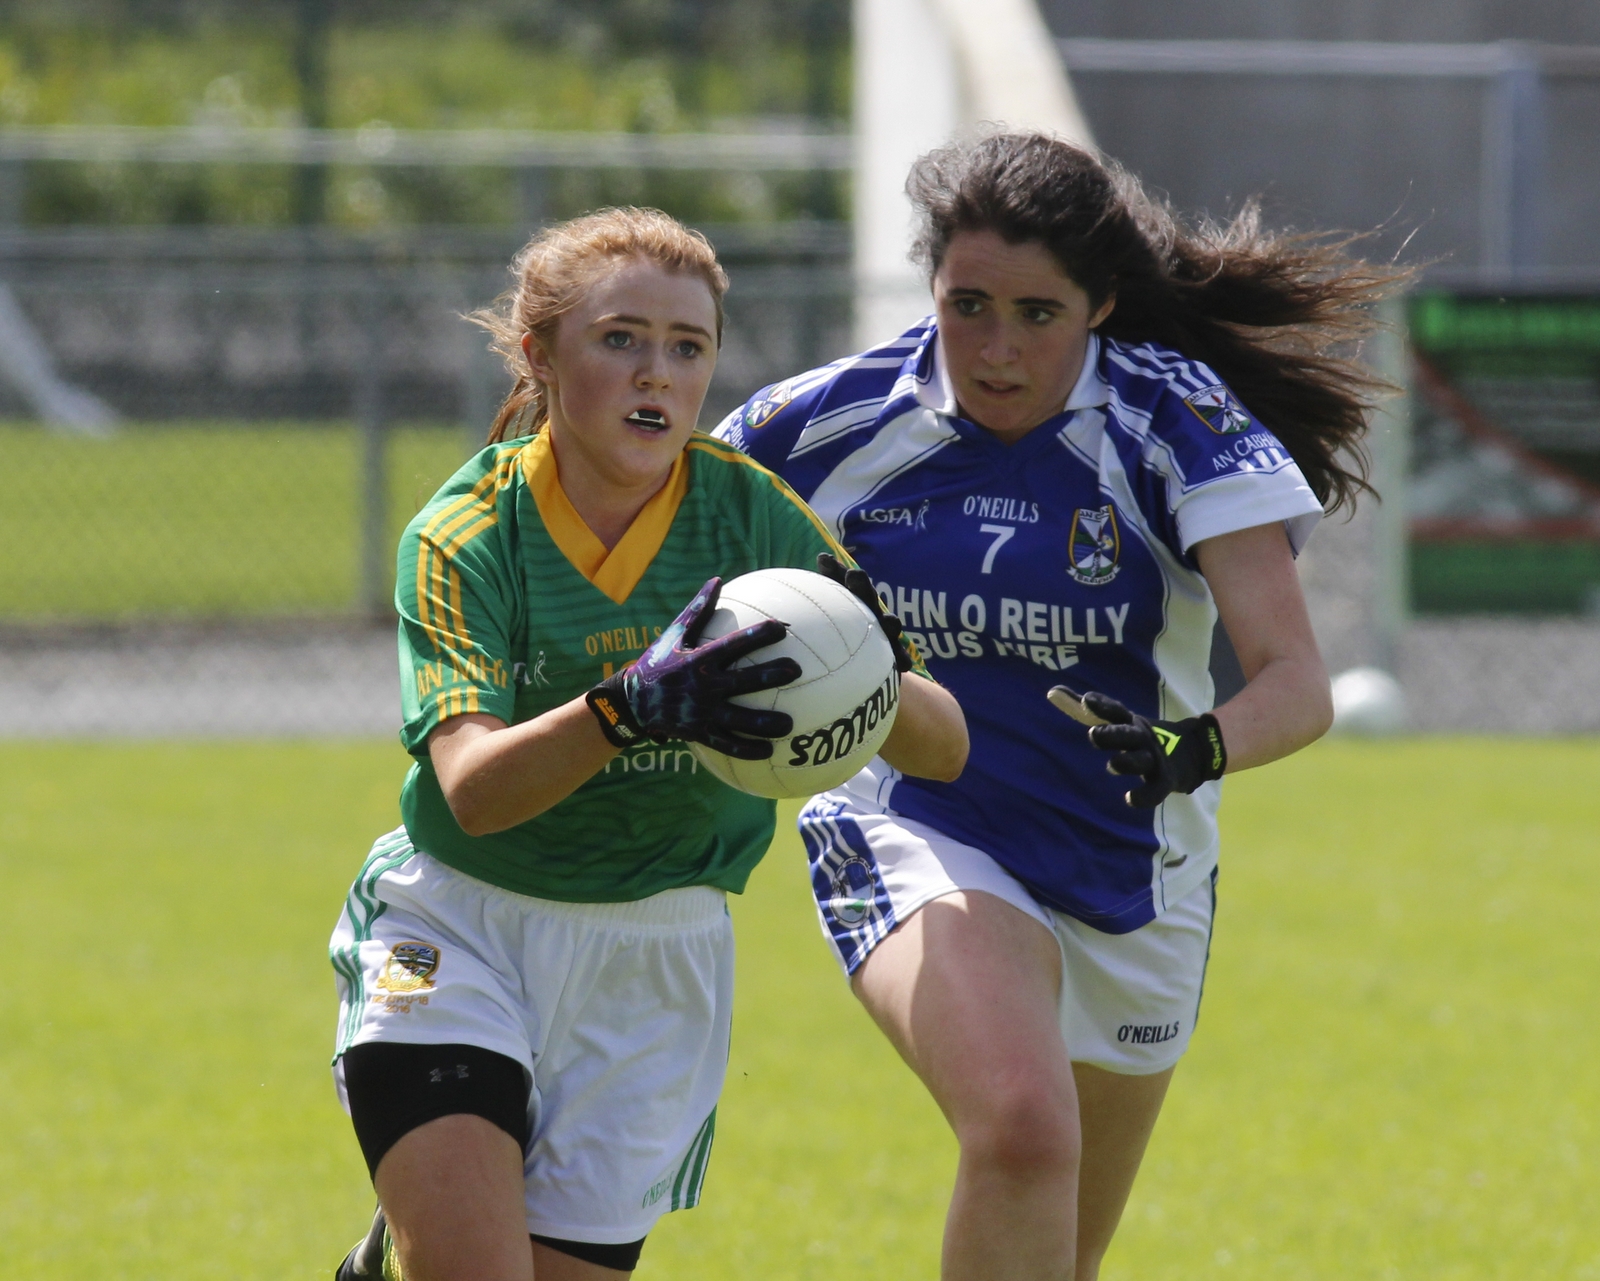 4 Action from the All Ireland Semi-Final where Meath overcame a strong Cavan challenge